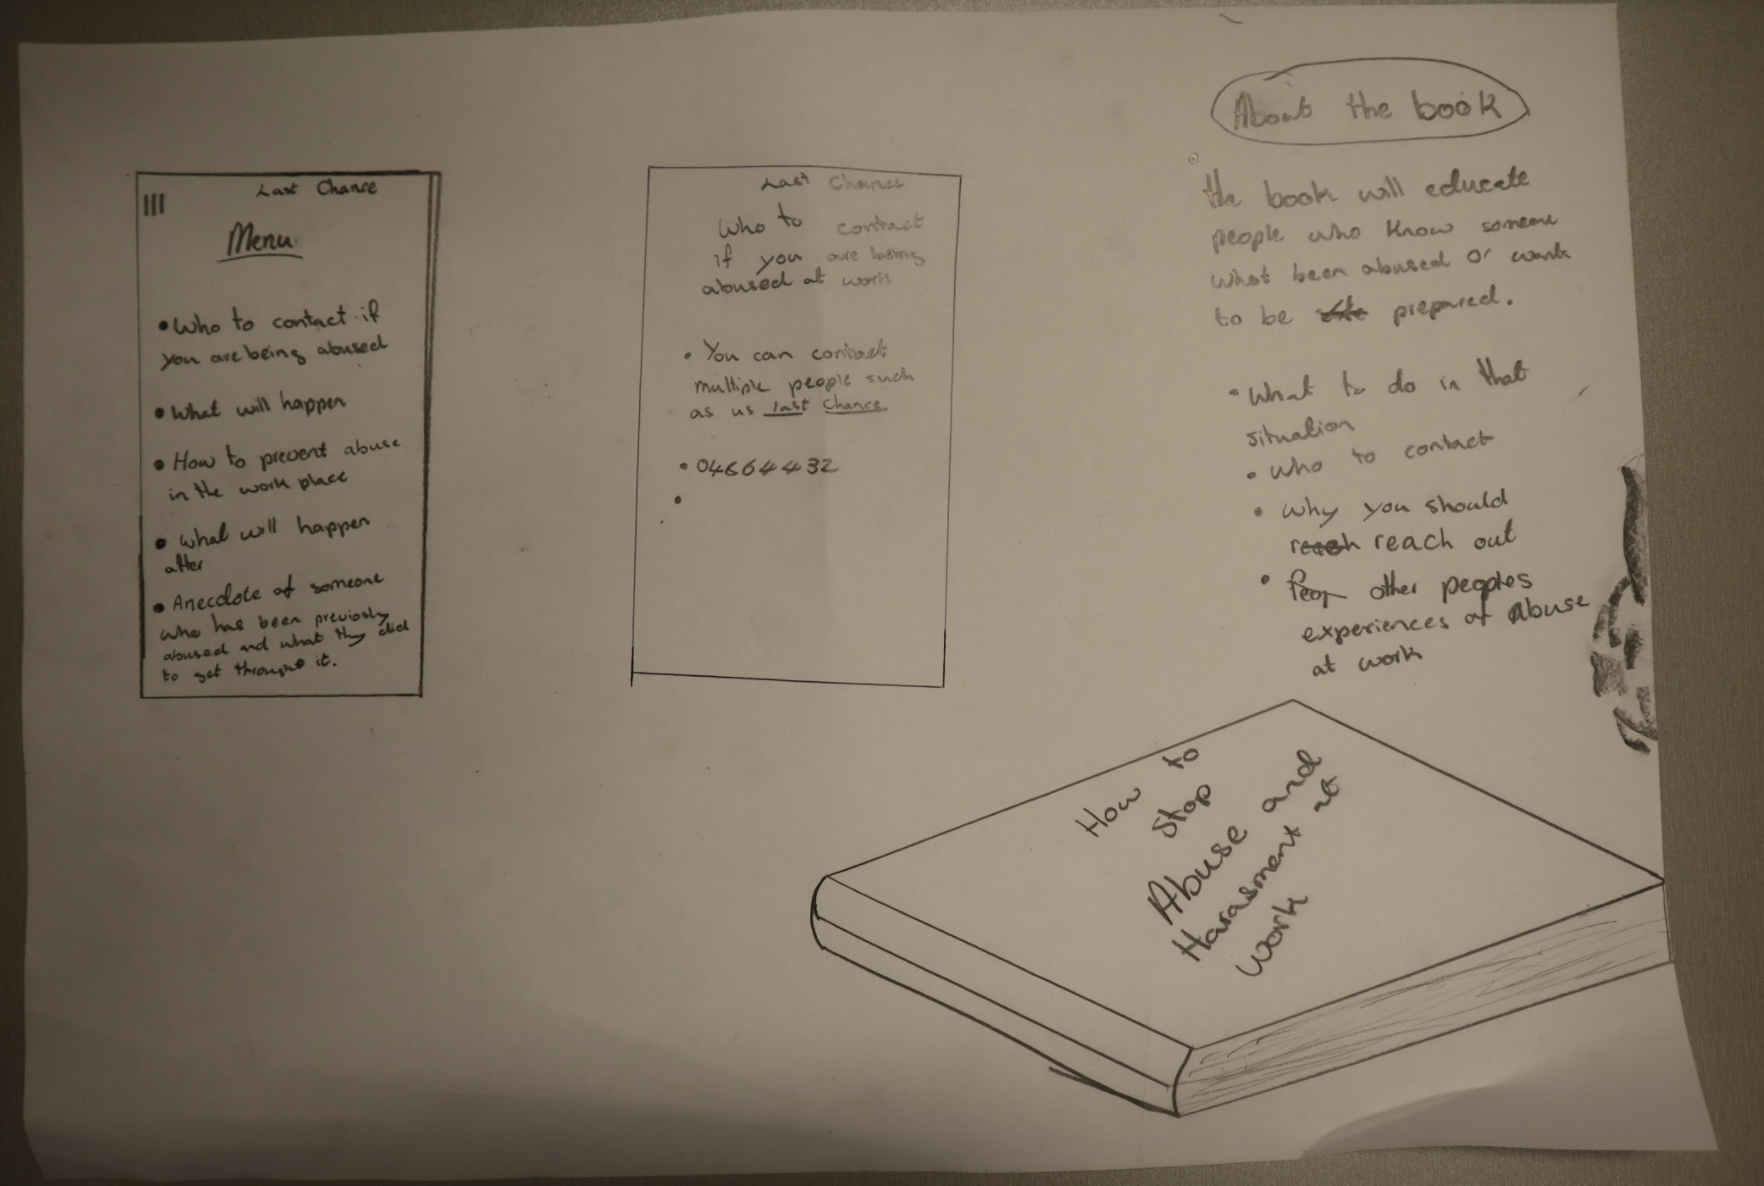 A sketch of the book with information on its contents.